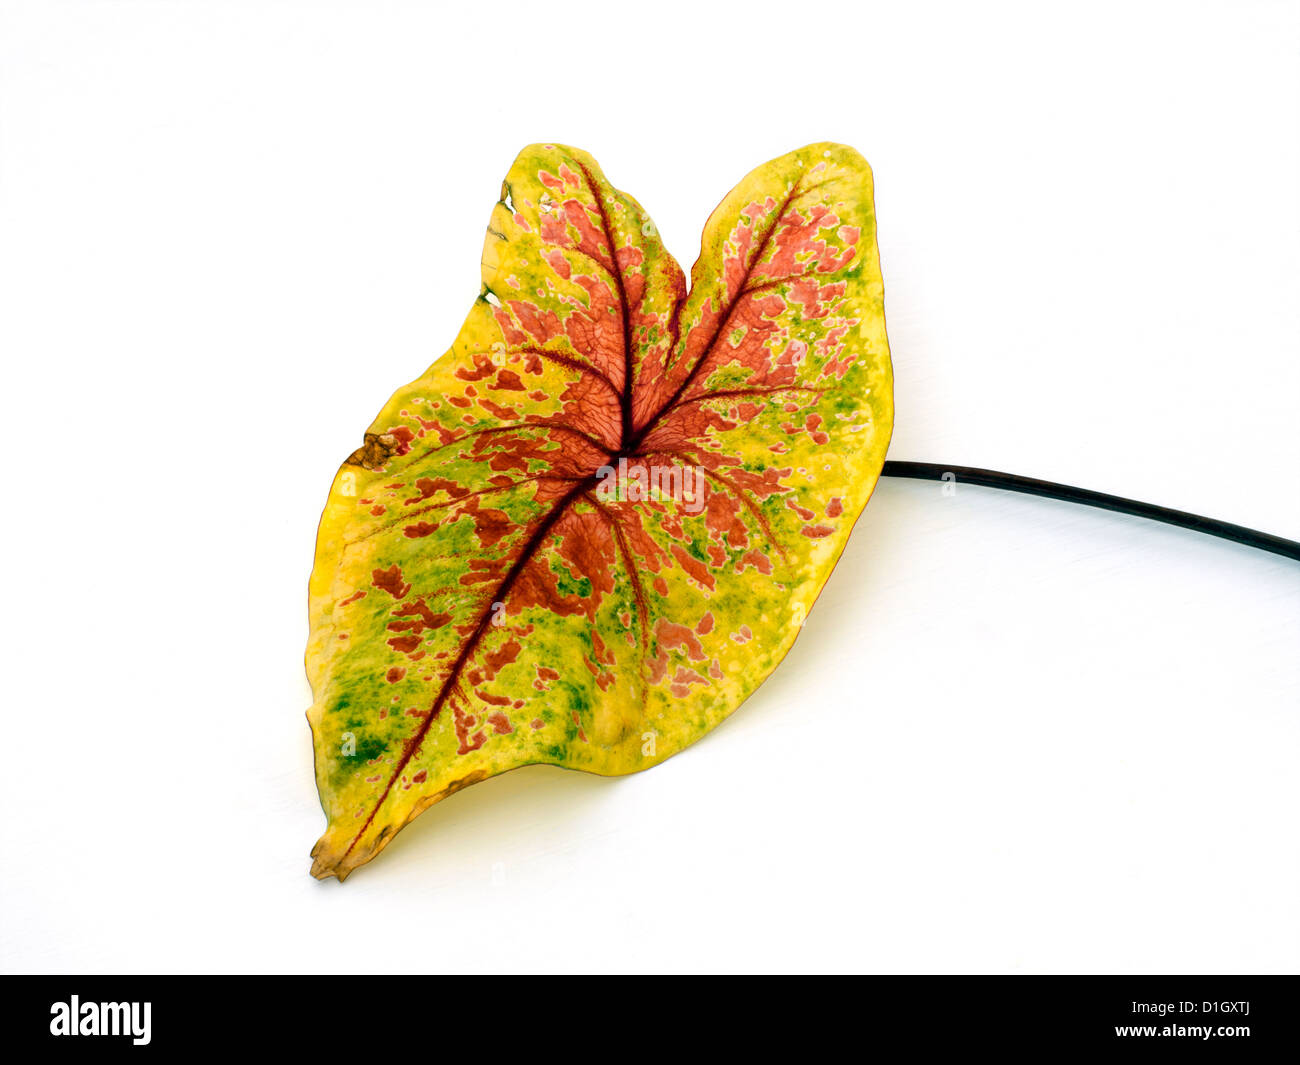 Yellow and Red Caladium Leaf Heart Shaped Stock Photo